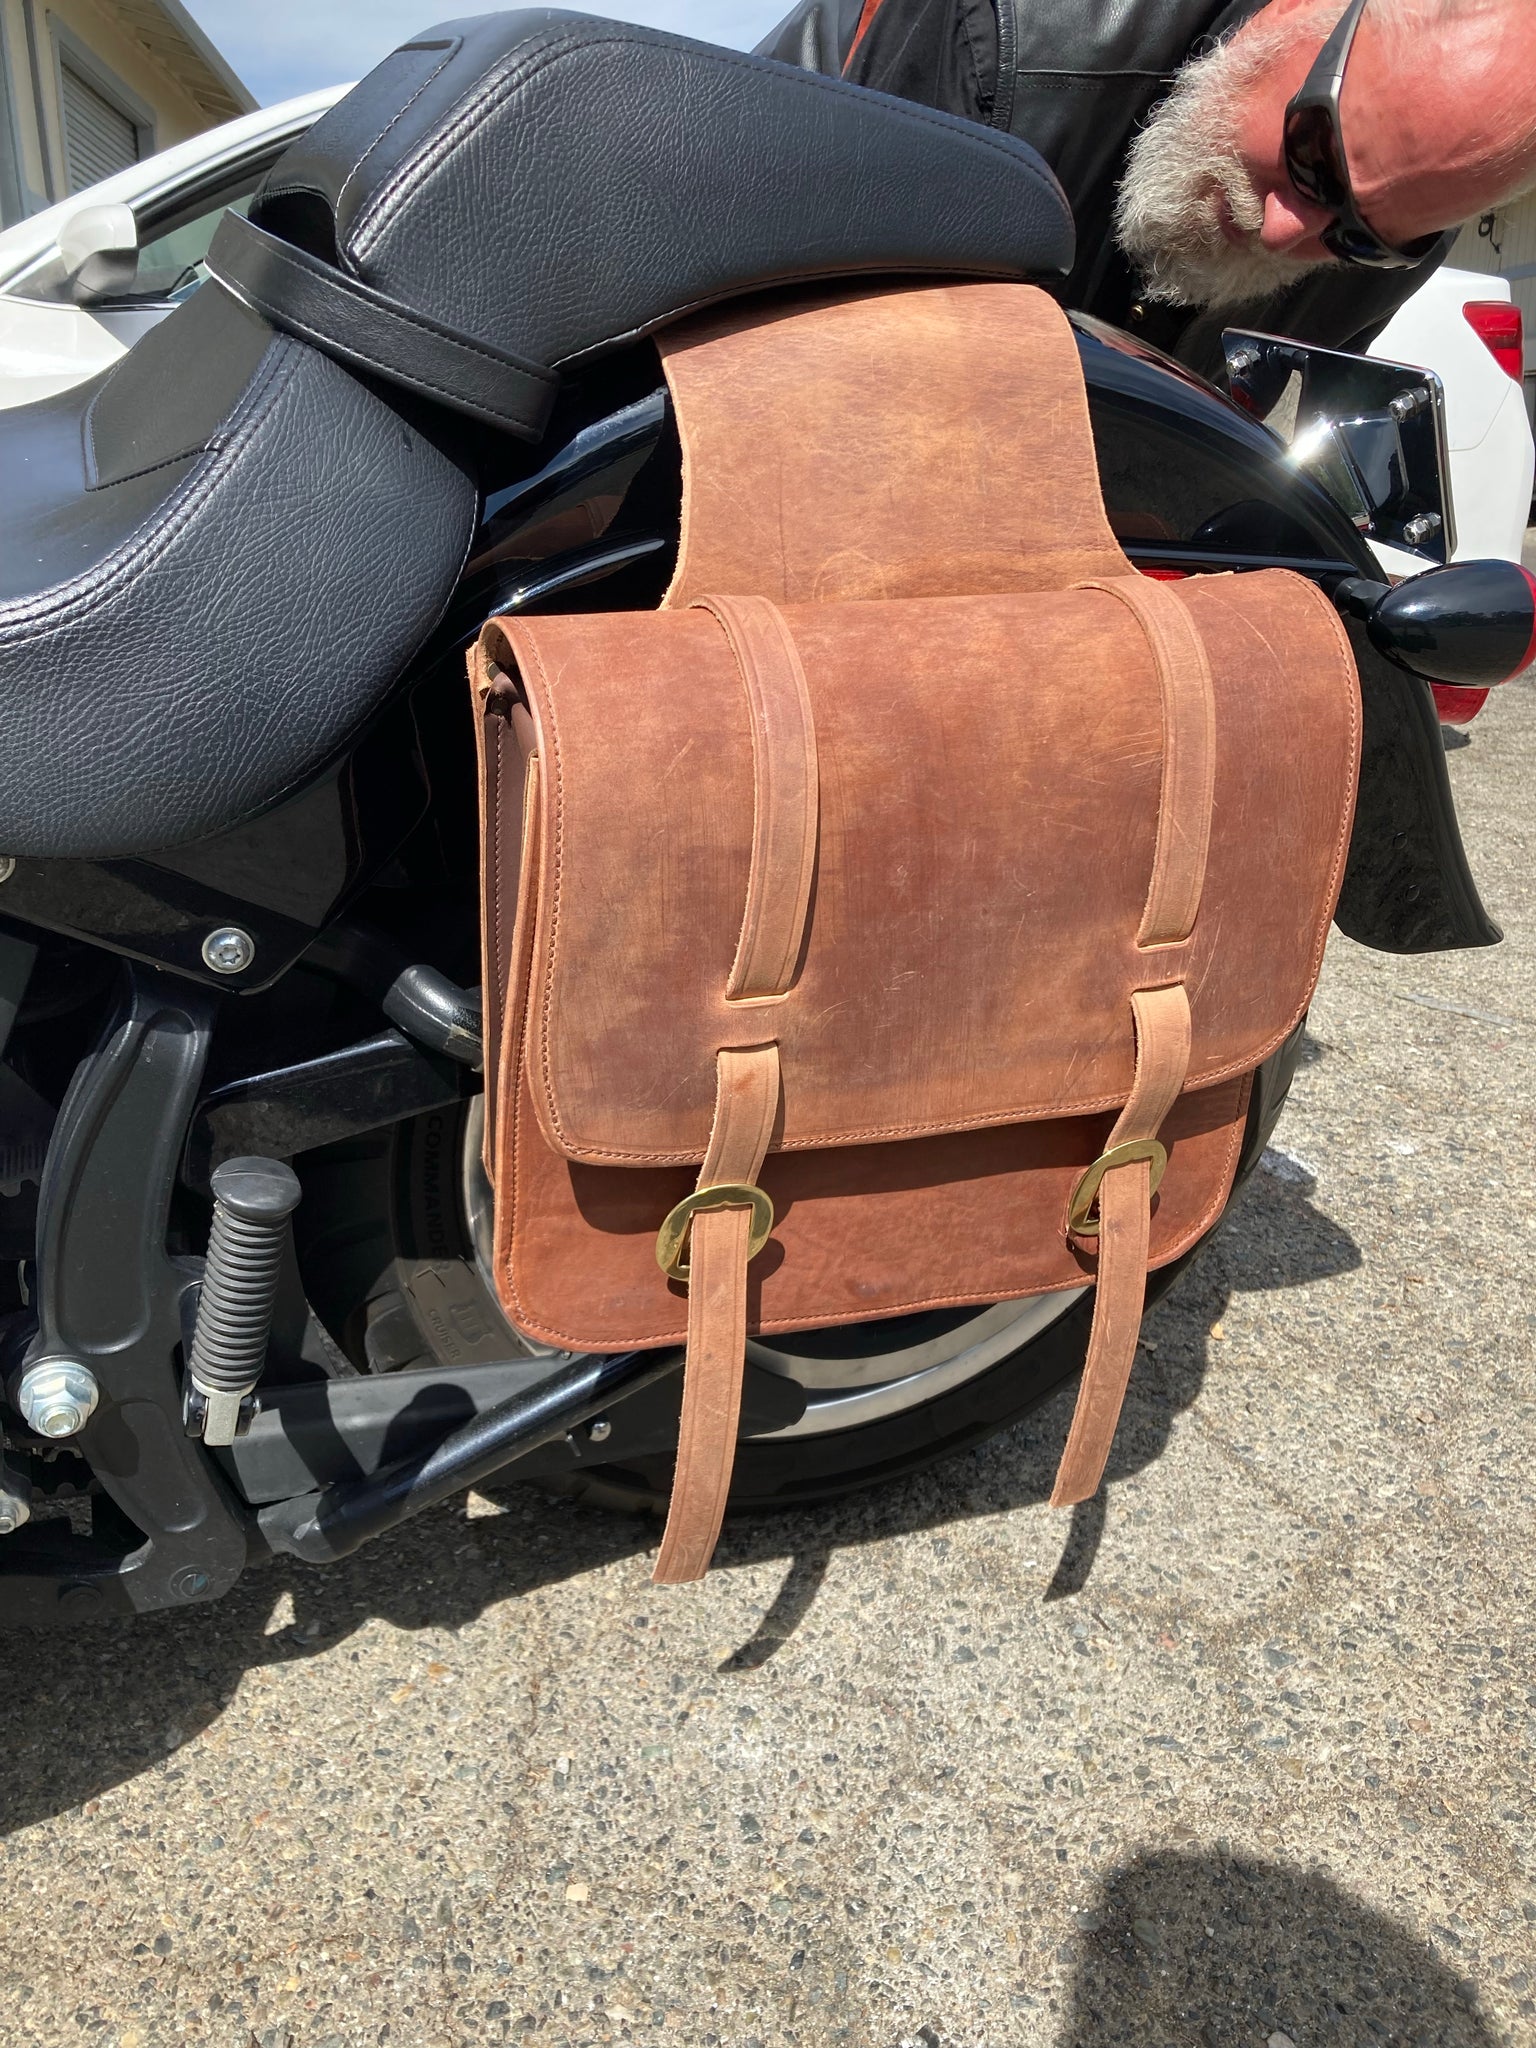 Komine saddle bags SA212, Motorcycles, Motorcycle Accessories on Carousell